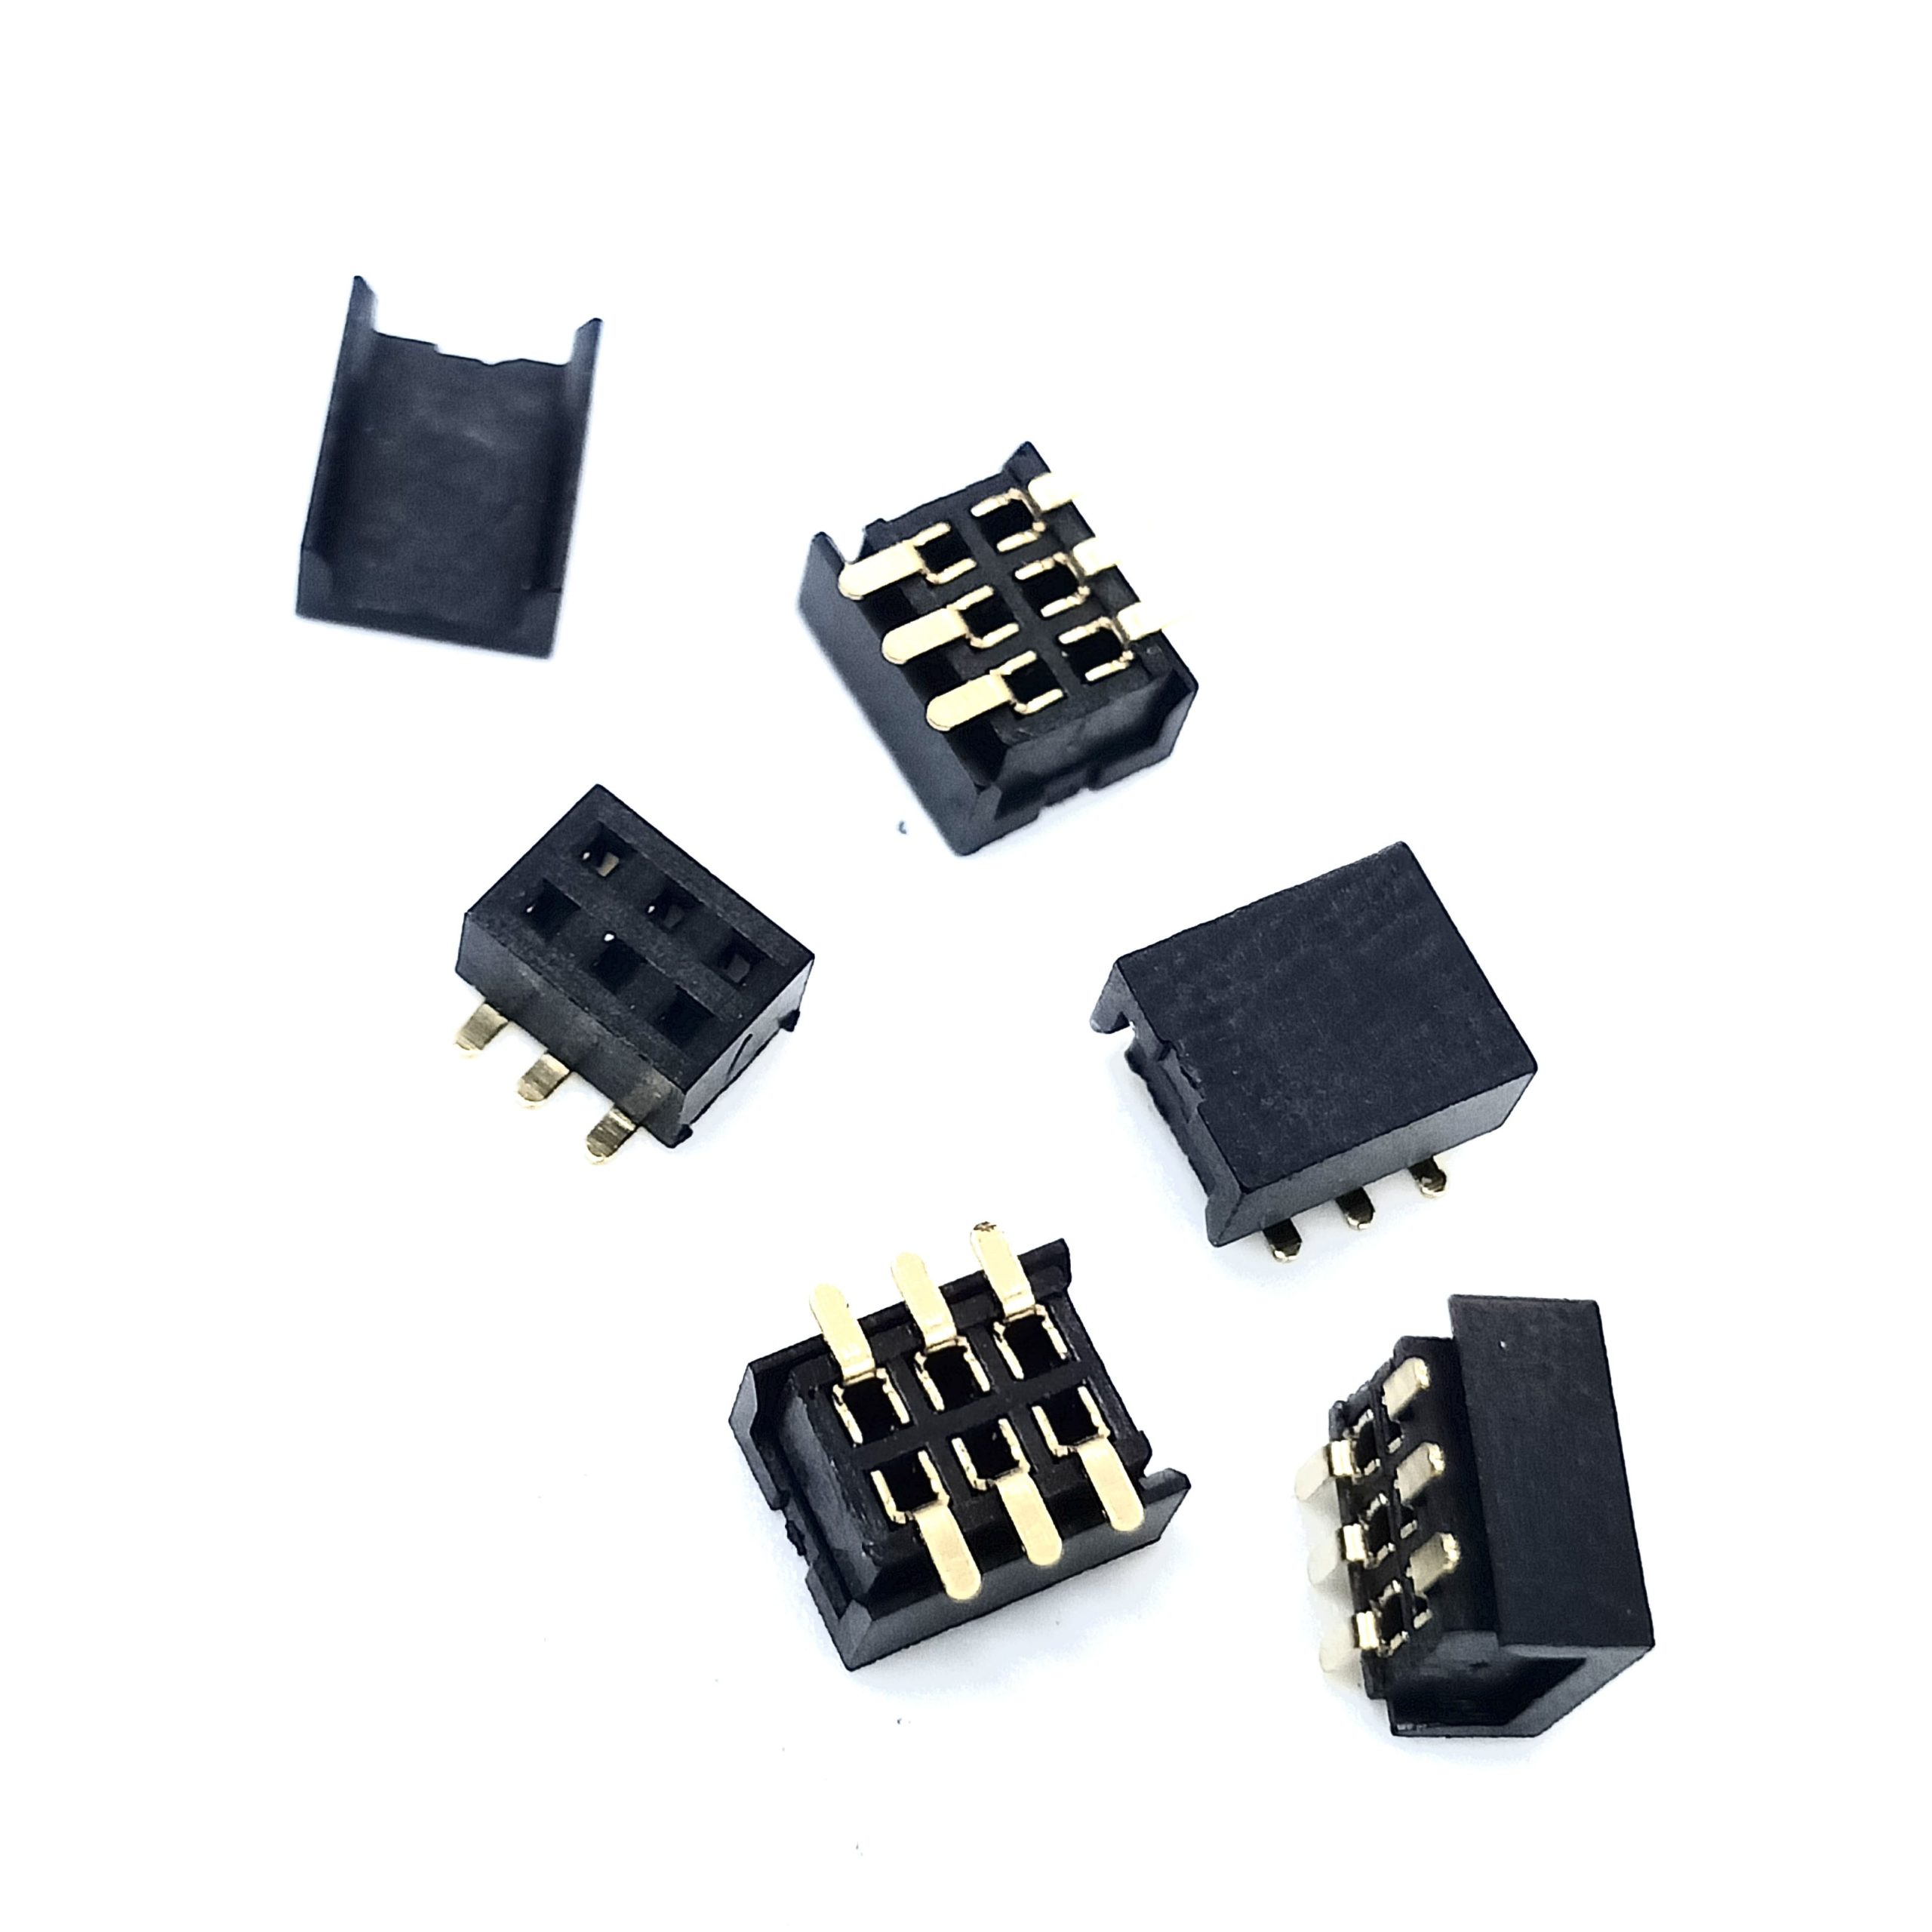 CLP-103-02-L-D-A-K is a specific type of electrical connector used in electronics and printed circuit board applications.